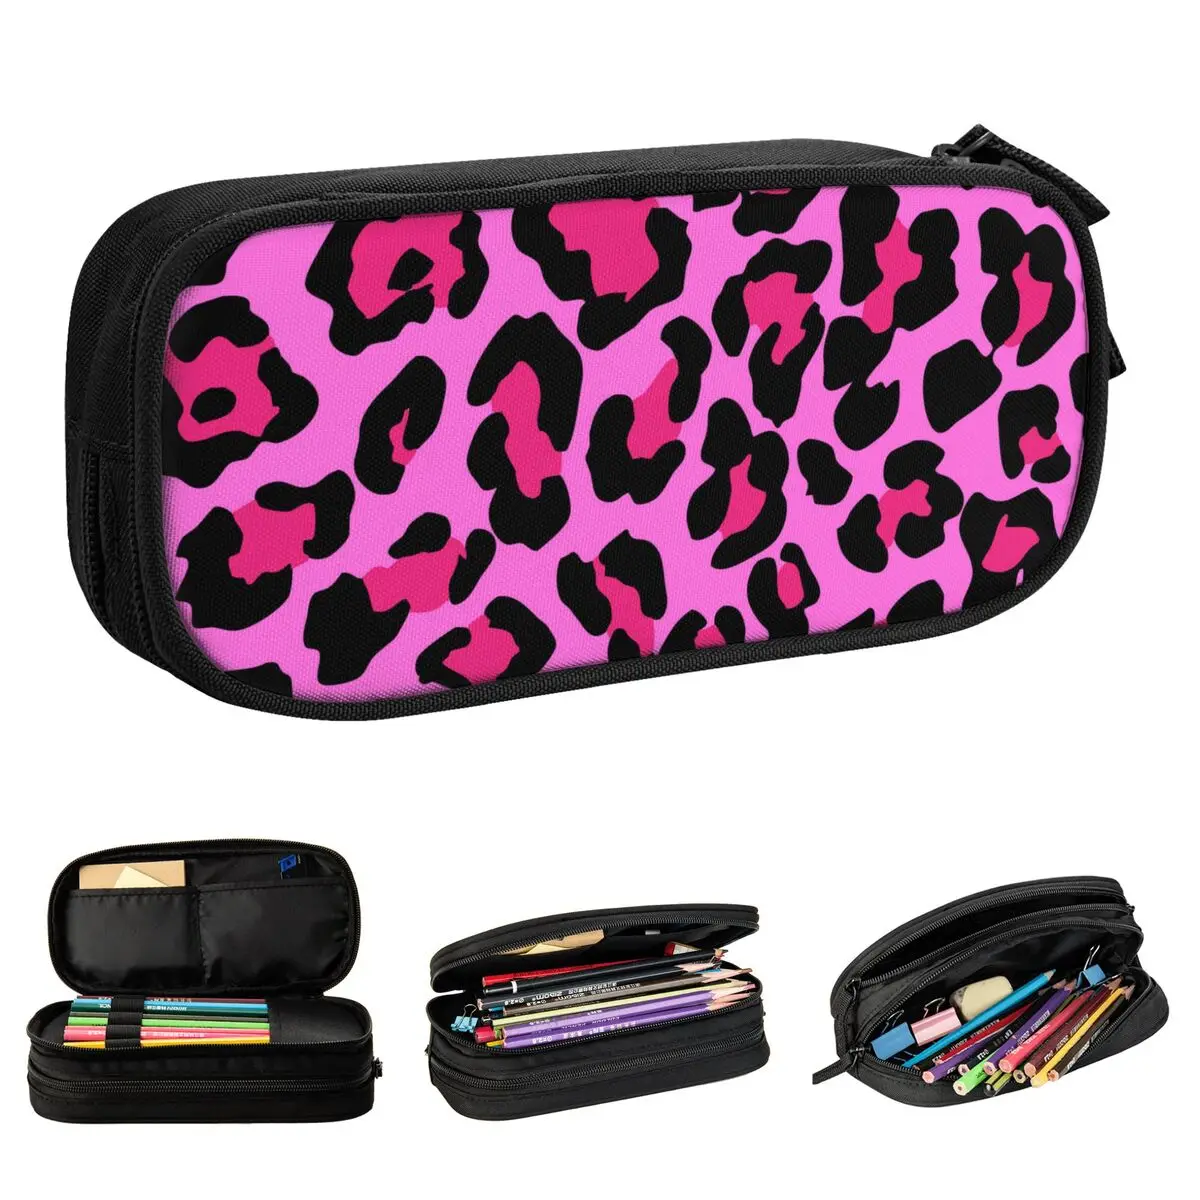 

New Pink Leopard Pencil Cases Cheetah Animal Pencilcases Pen Box Kids Large Storage Bag Office Zipper Stationery